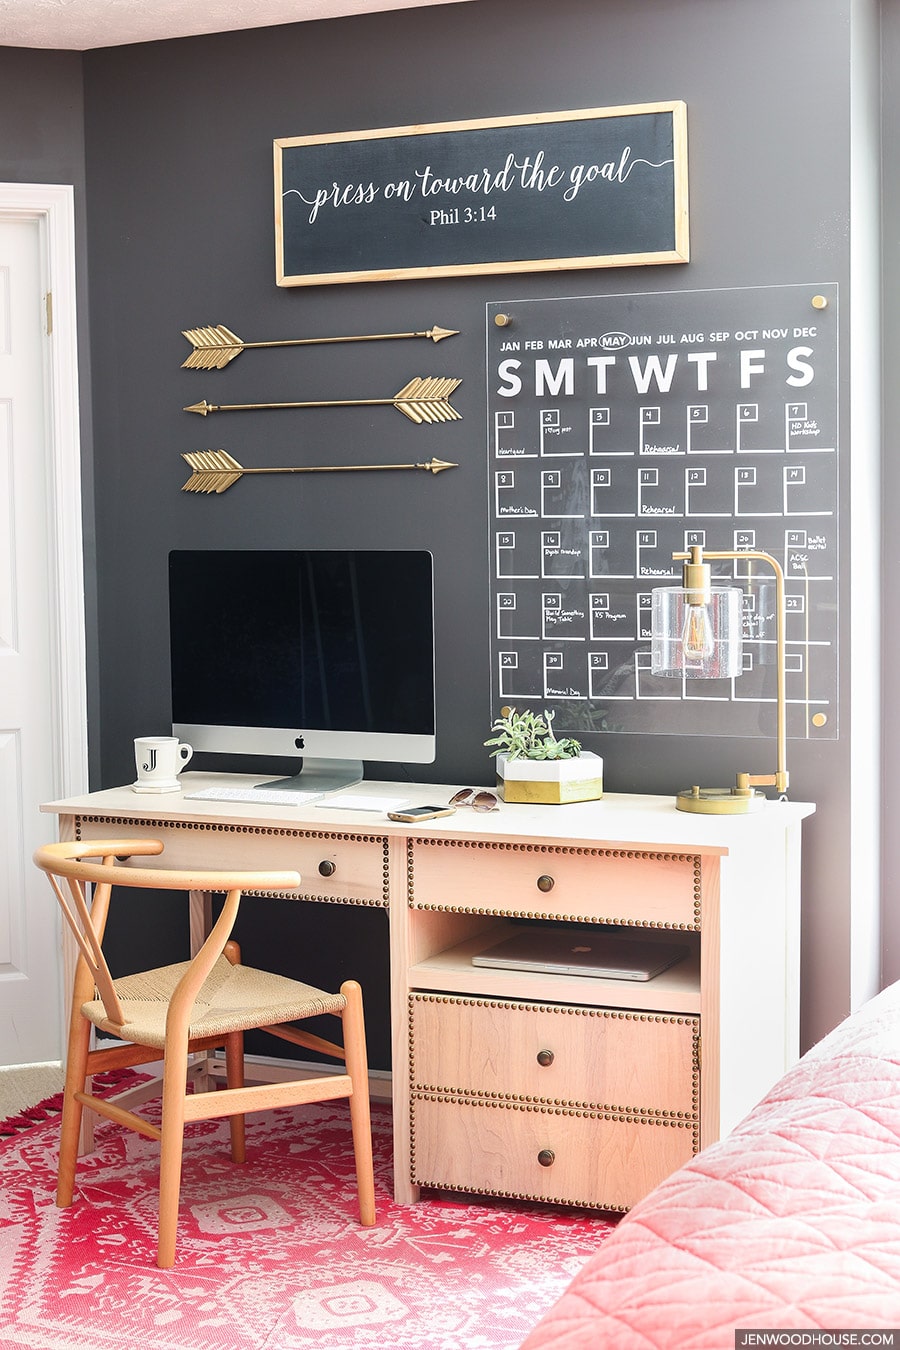 This home office space is so stylish and chic! Tutorial on how to make an acrylic wall calendar. LOVE!